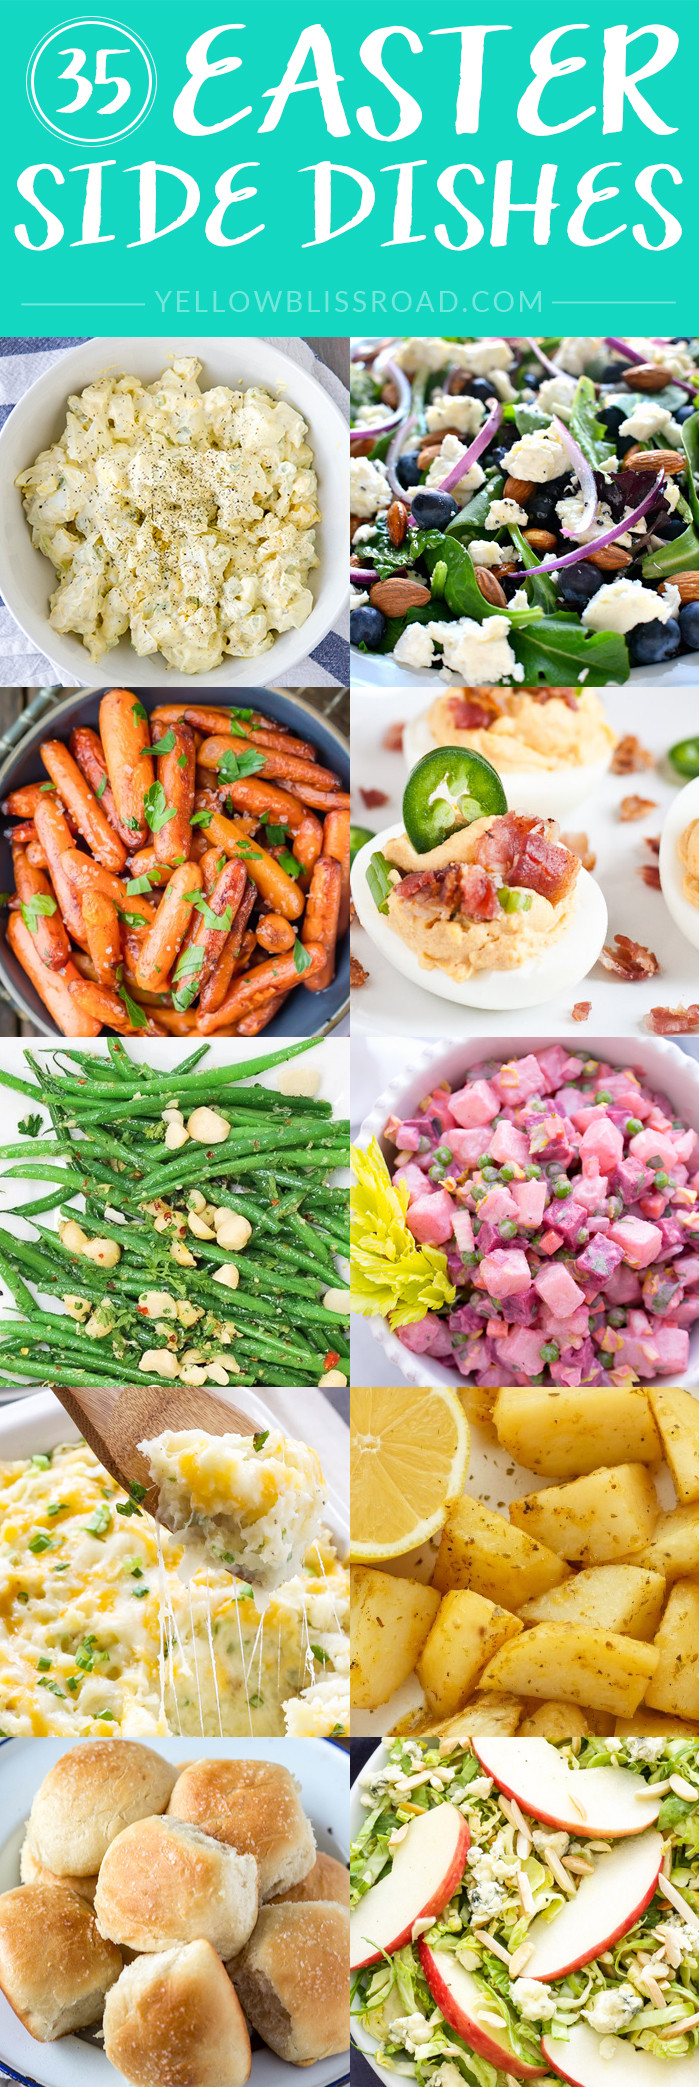 Easter Brunch Side Dishes
 Easter Side Dishes More than 50 of the Best Sides for